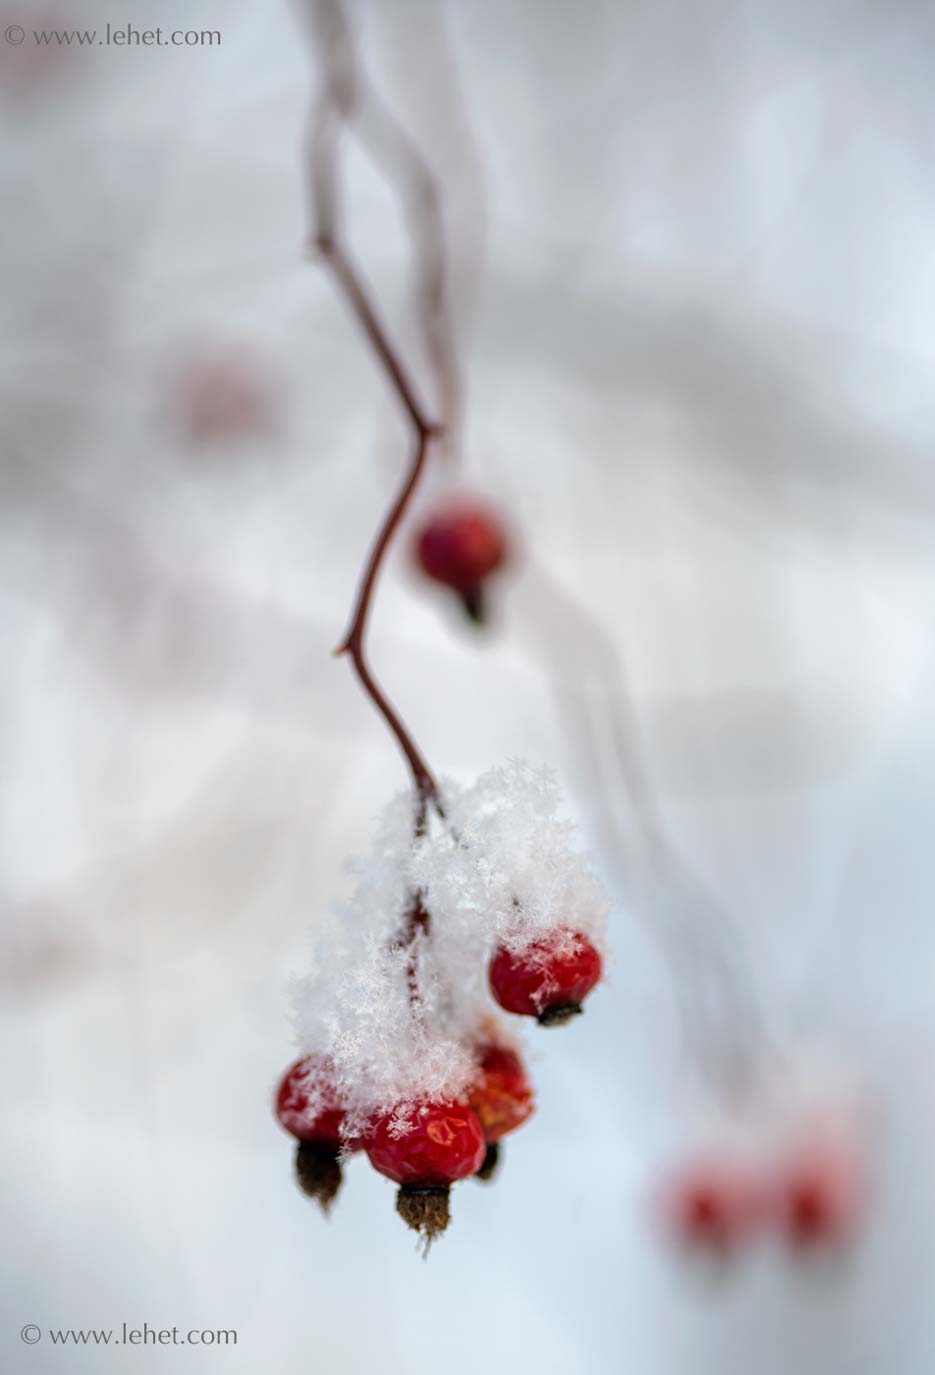 Rose Hips with Big New Snowflakes